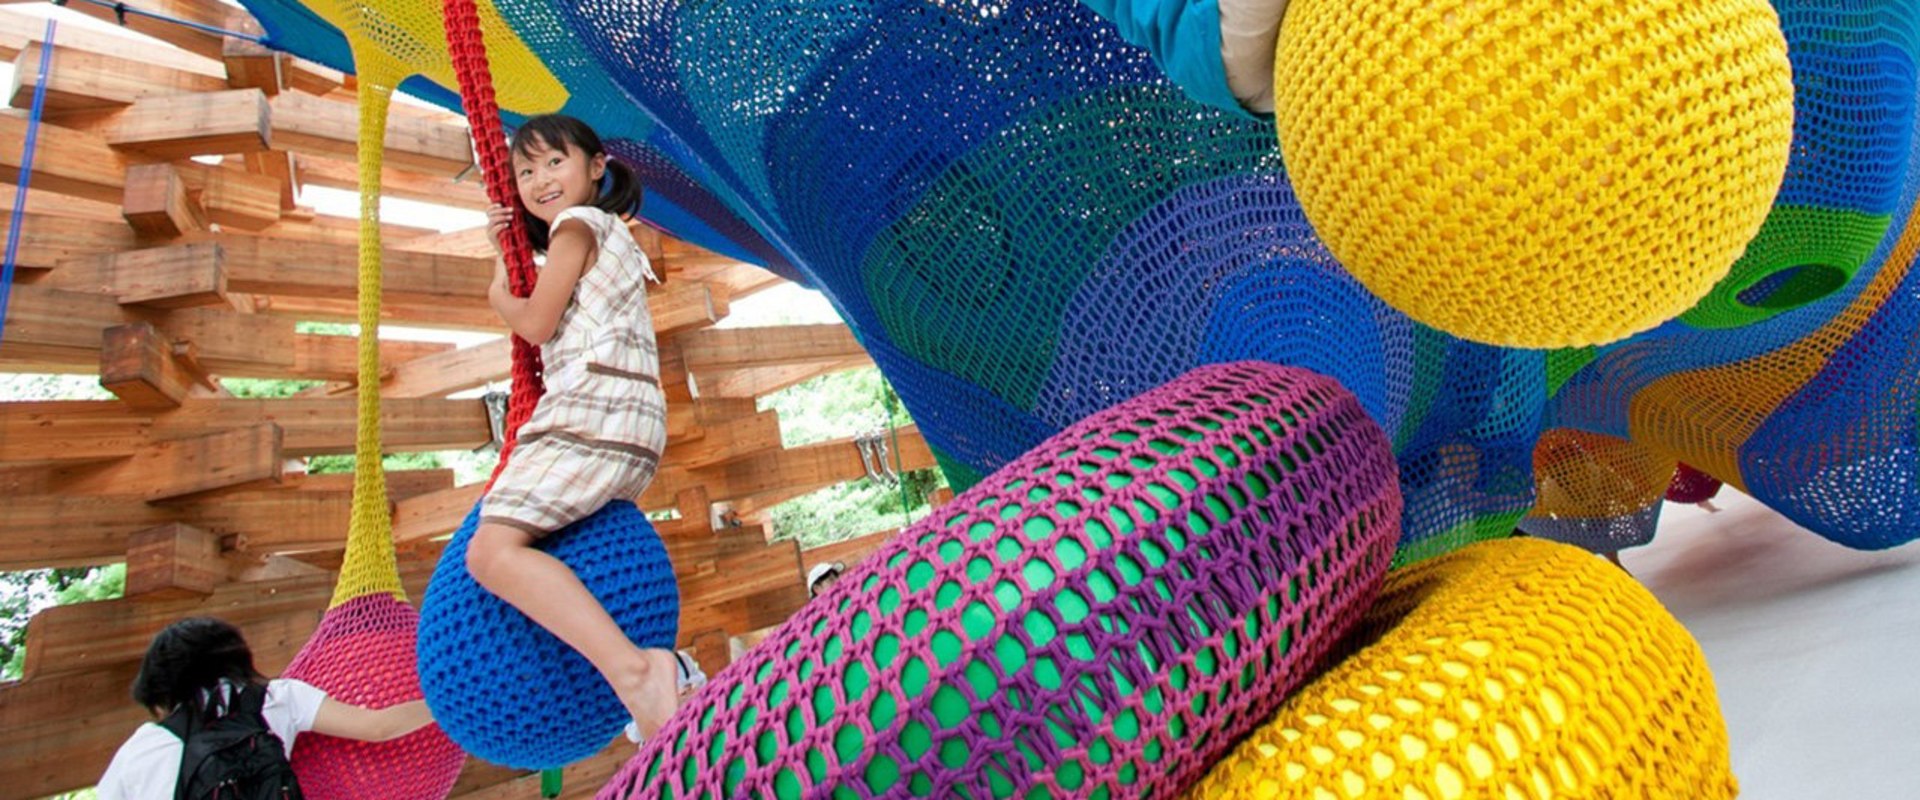 The Best Family-Friendly Museums in Southern California